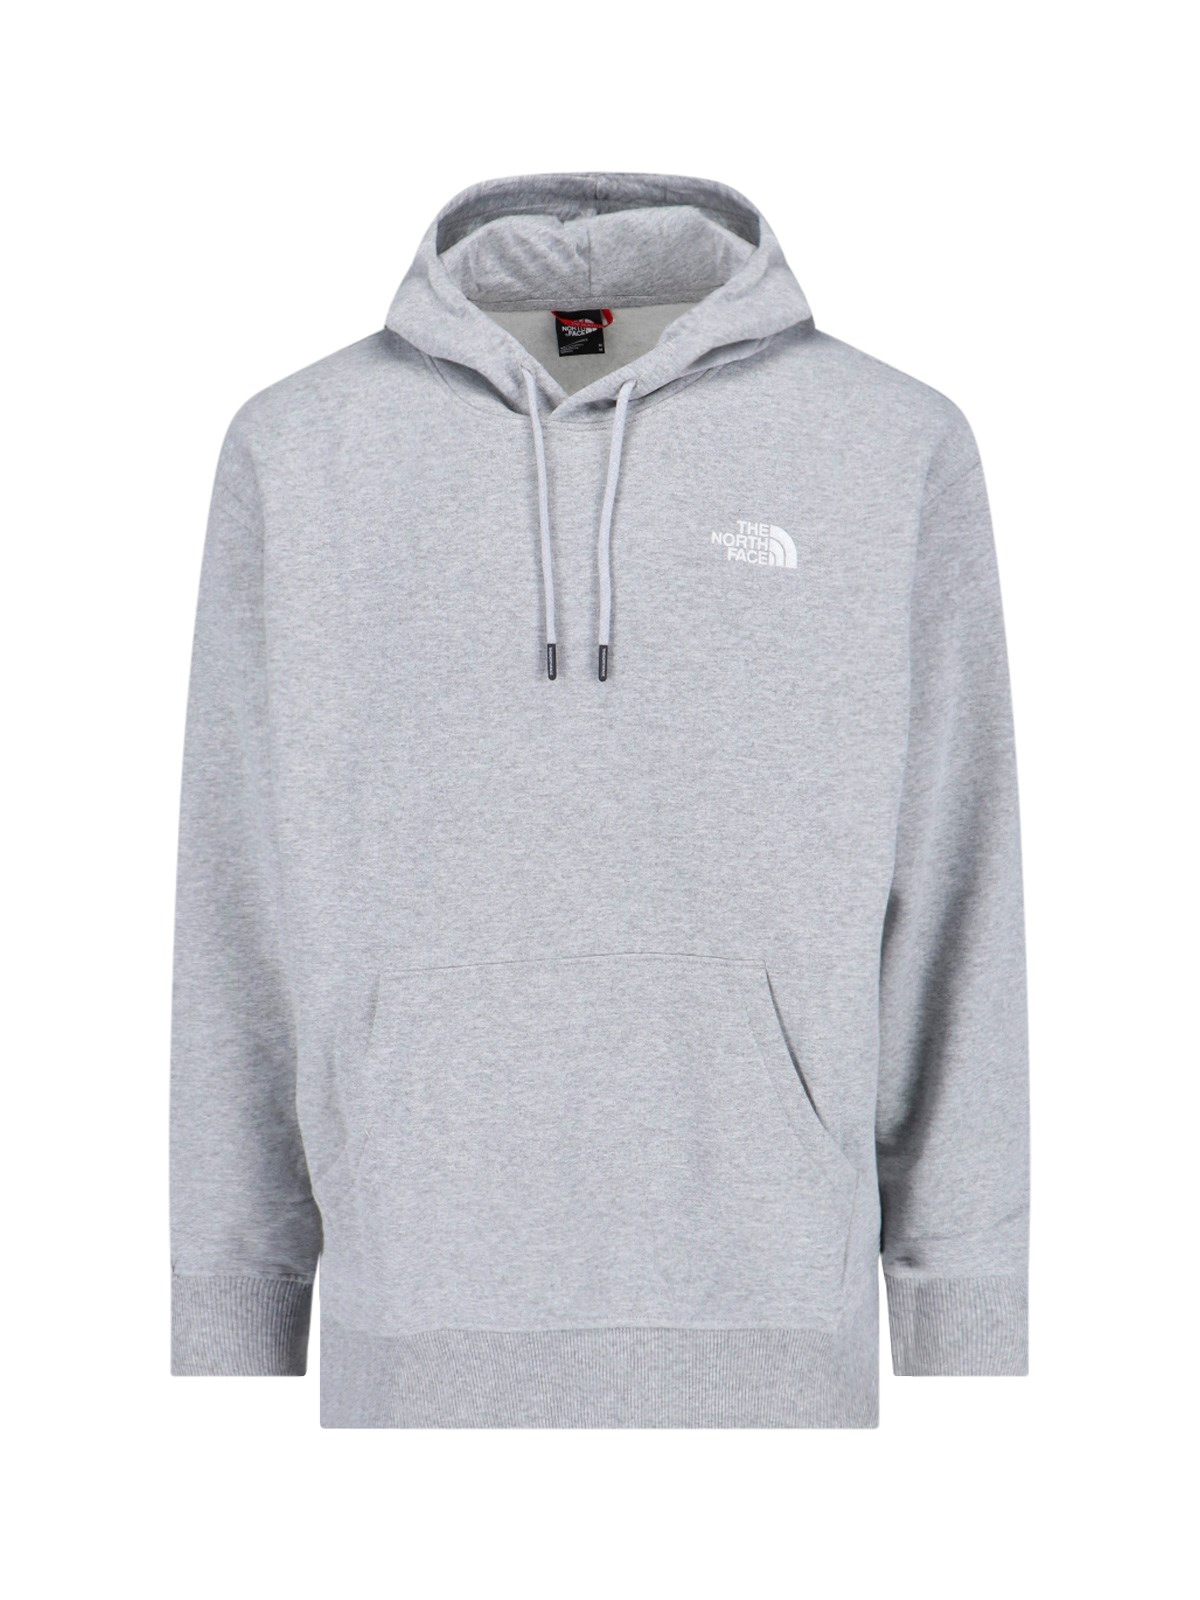 The North Face Logo Hoodie In Gray